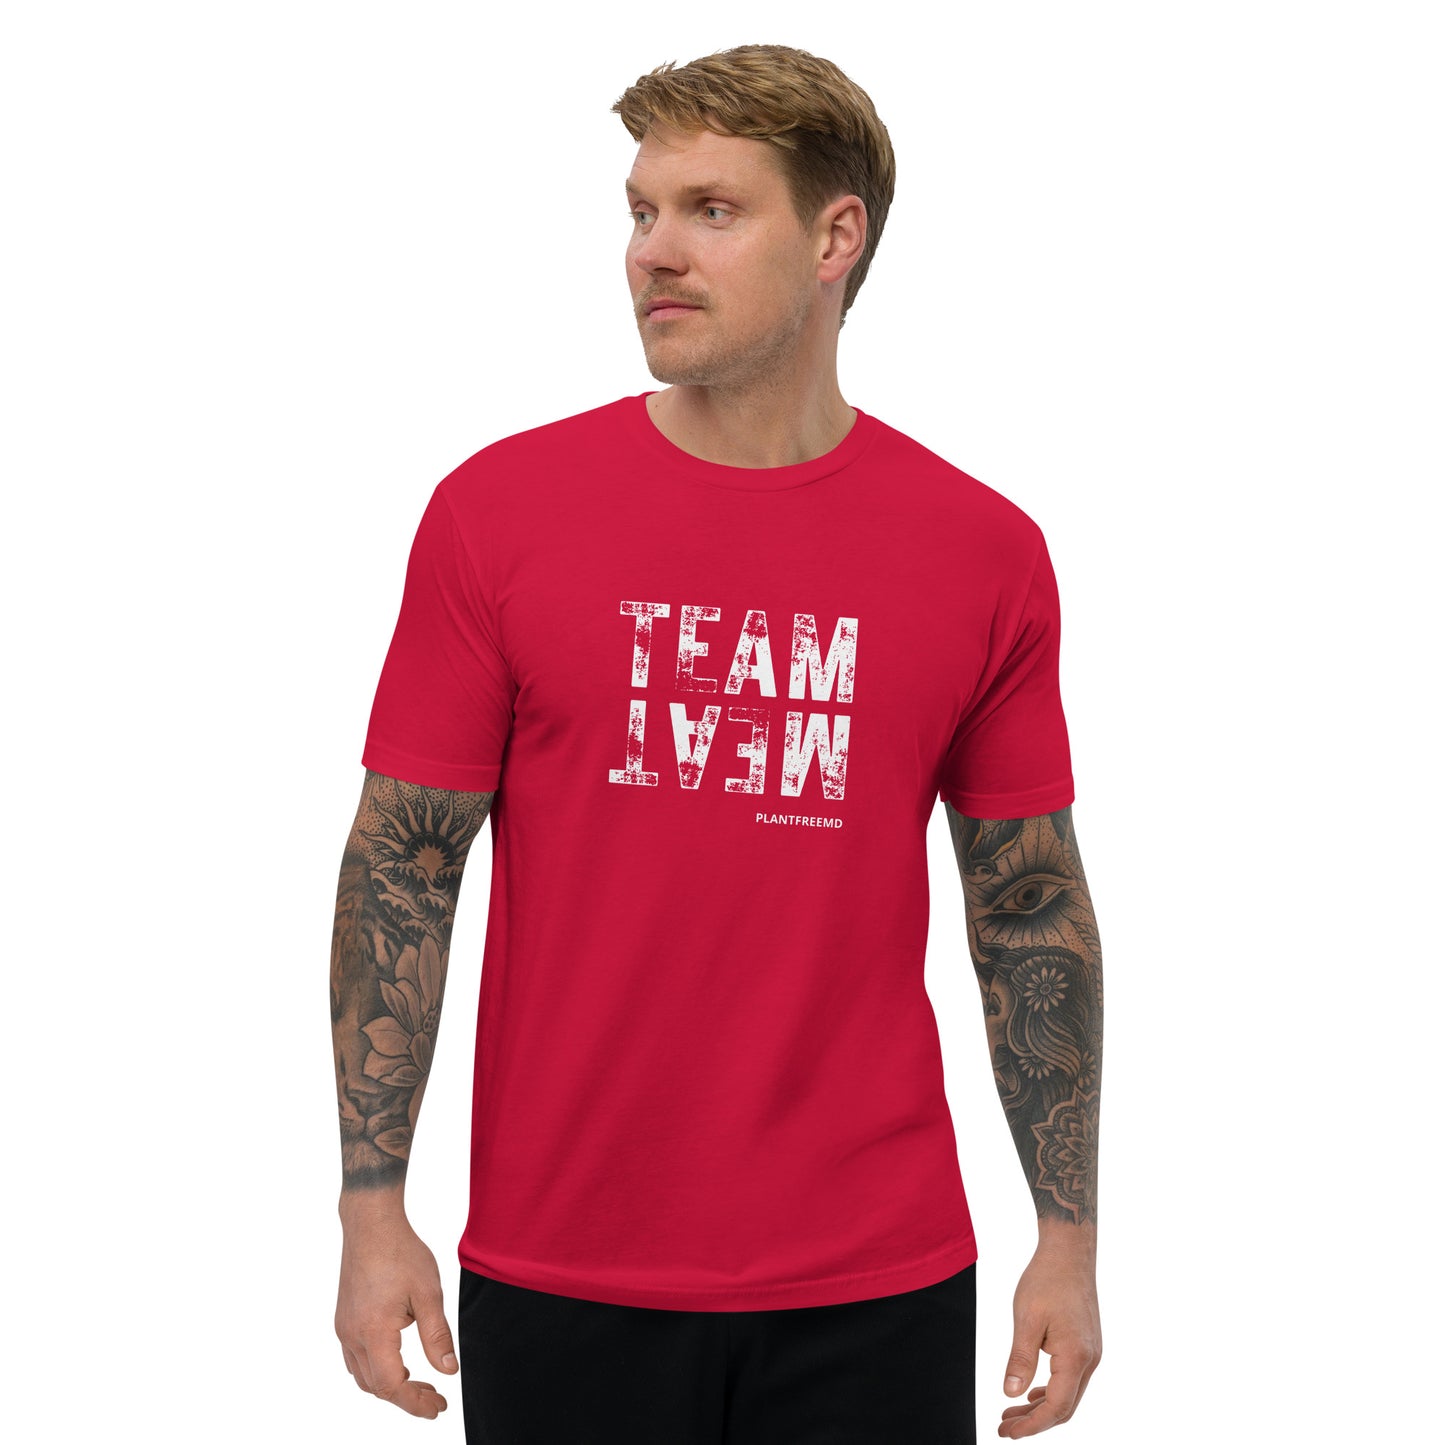 Team Meat Men's Fitted T-shirt